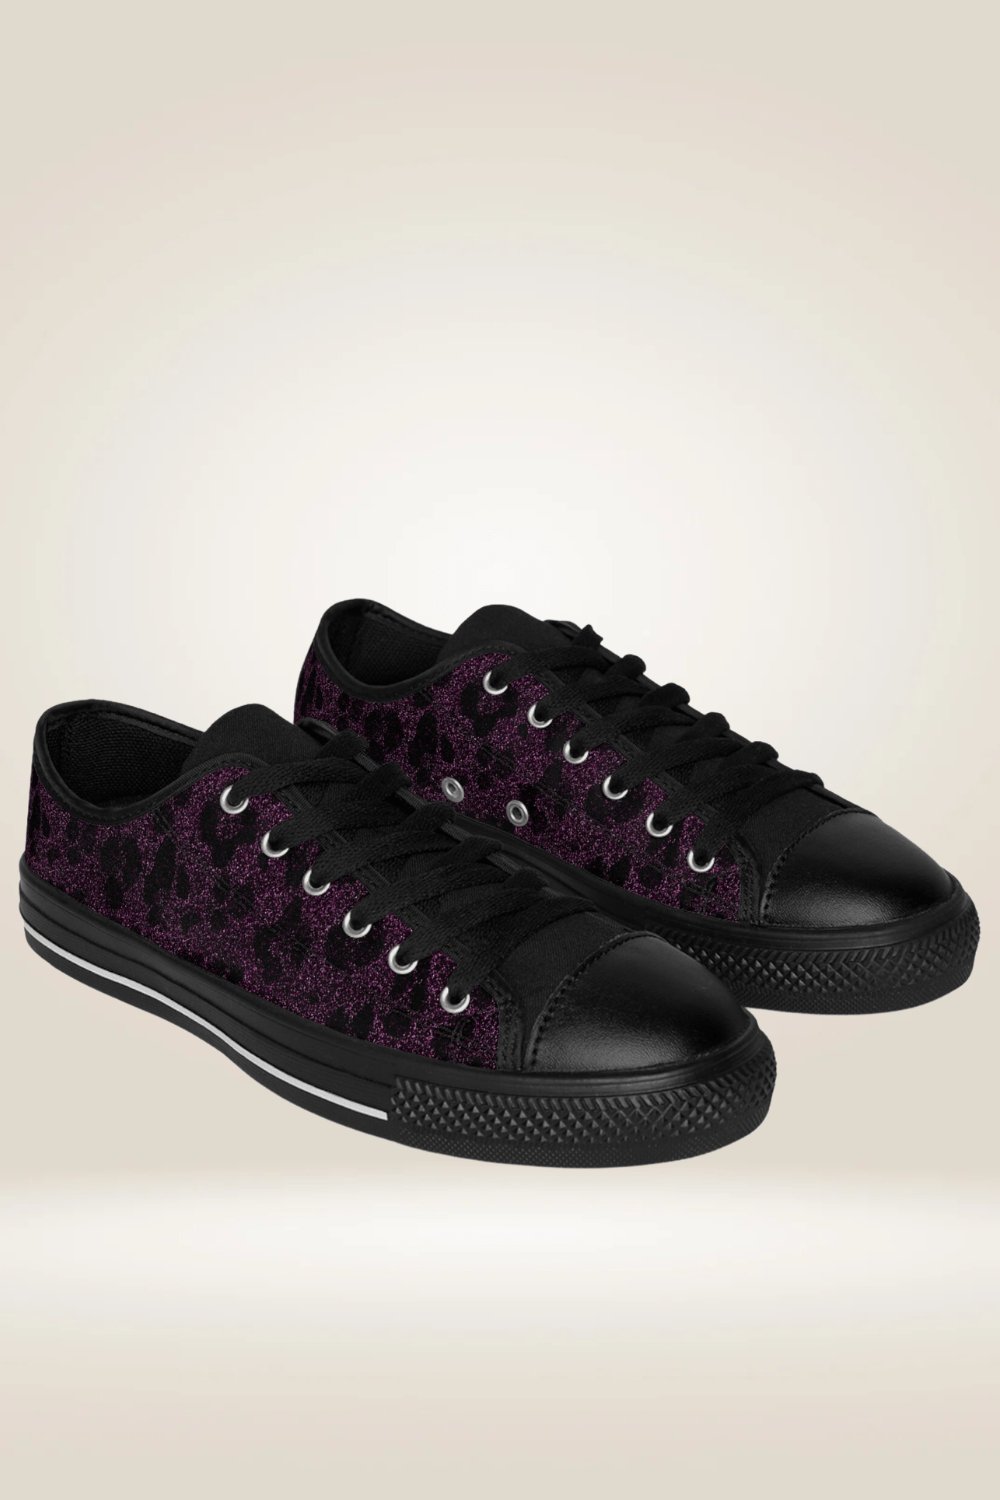 Glitter Print Black And Purple Sneakers - TGC Boutique - Sneakers